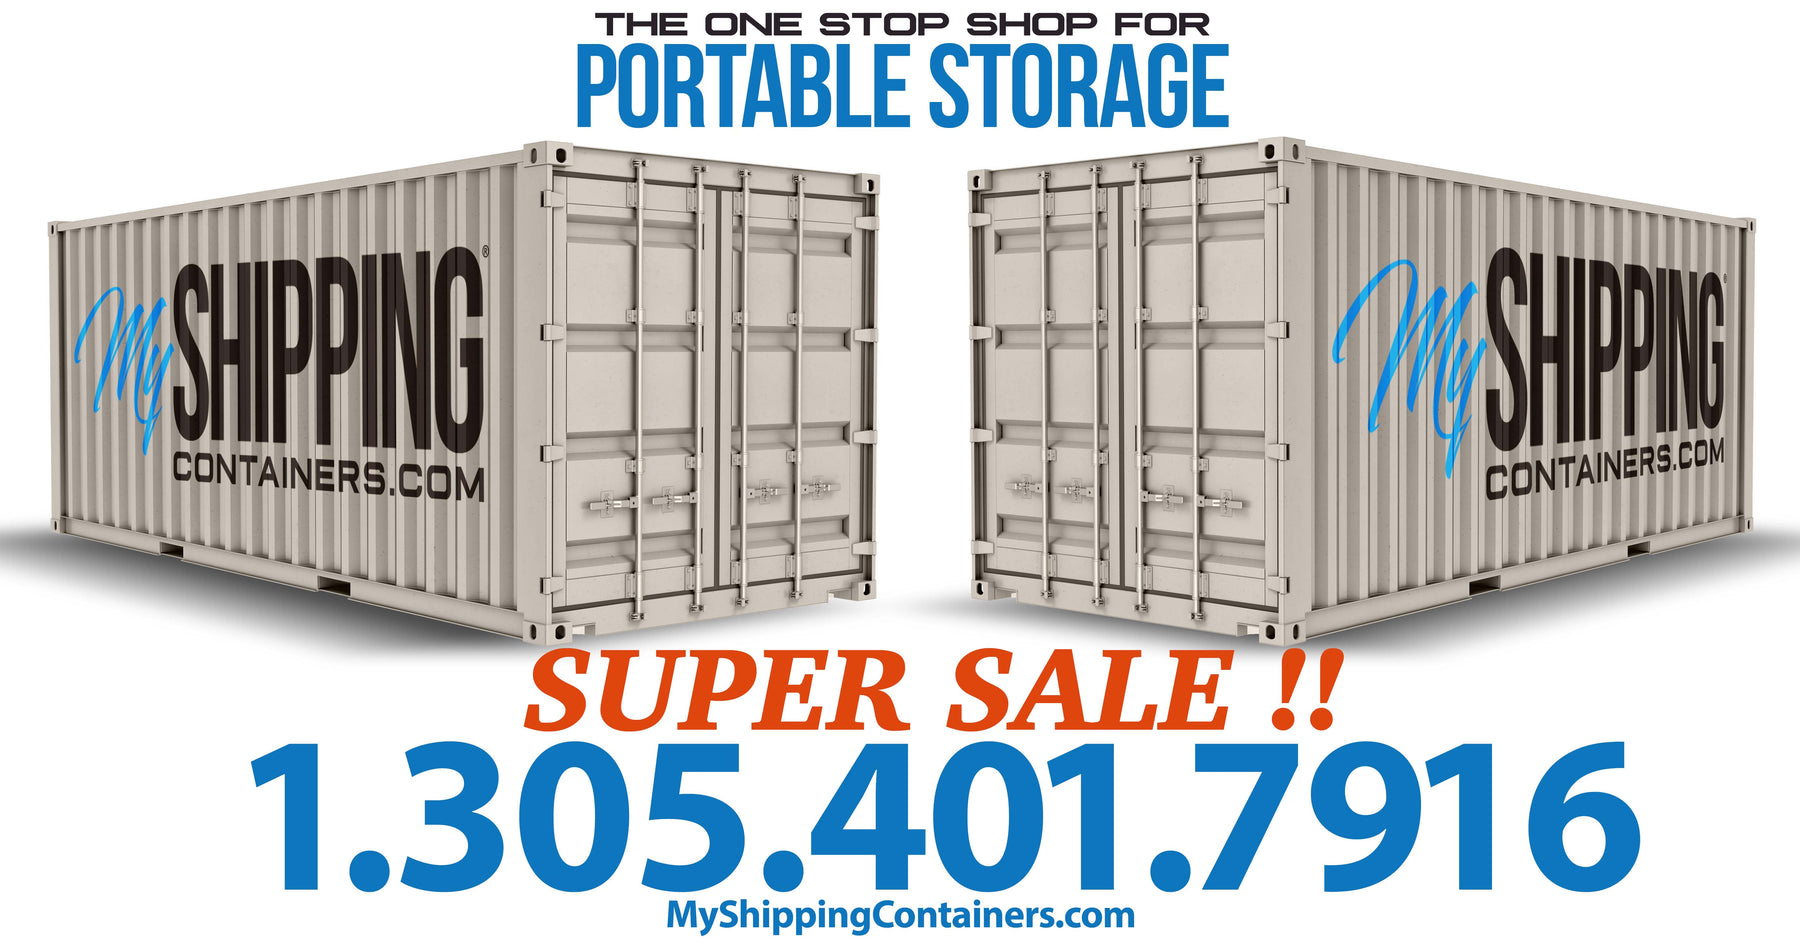 Refrigerated Containers, Cold Storage, Reefer Containers, My Shipping Containers